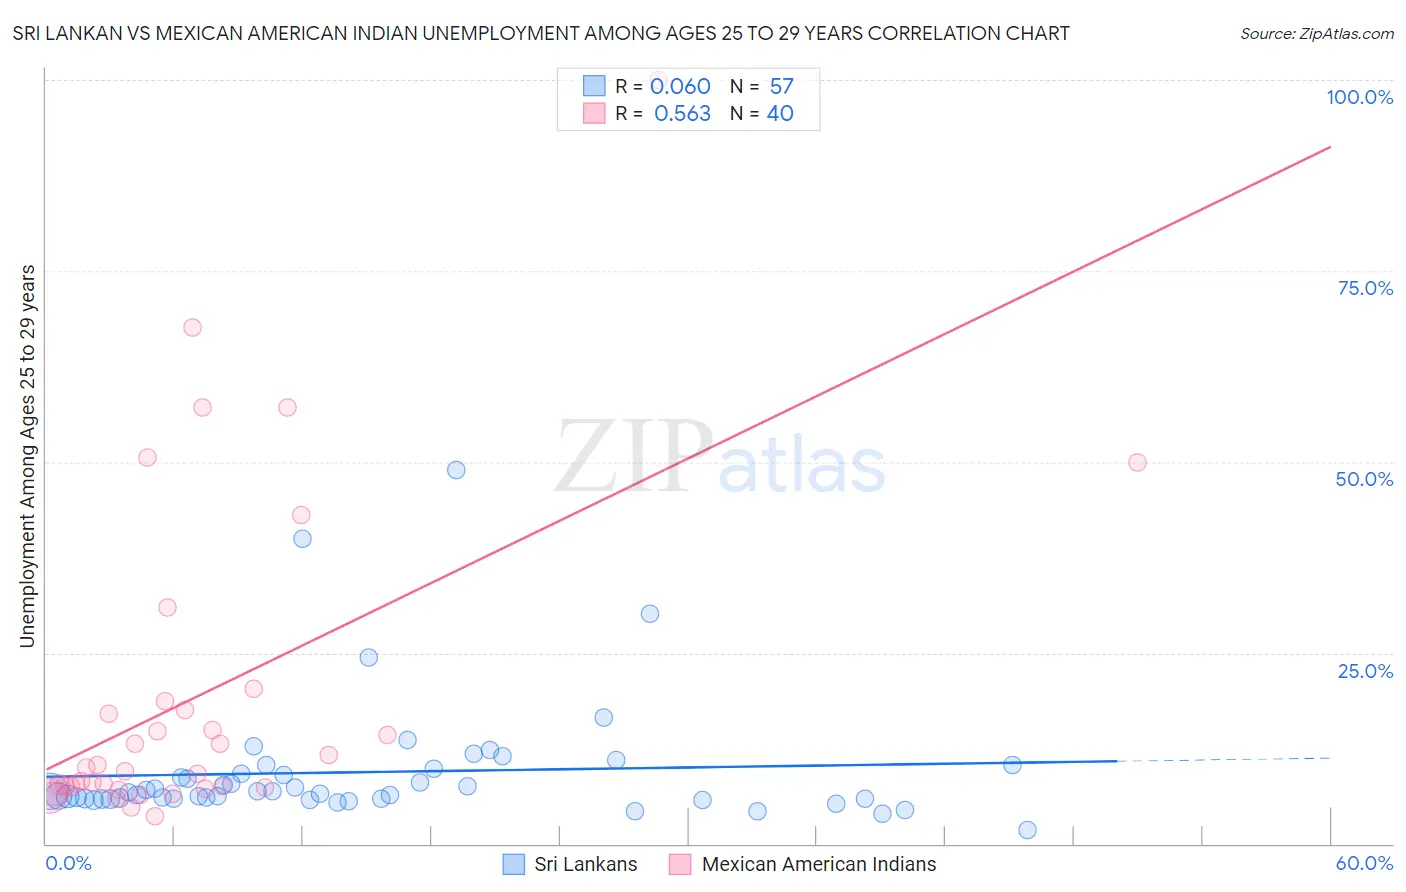 Sri Lankan vs Mexican American Indian Unemployment Among Ages 25 to 29 years